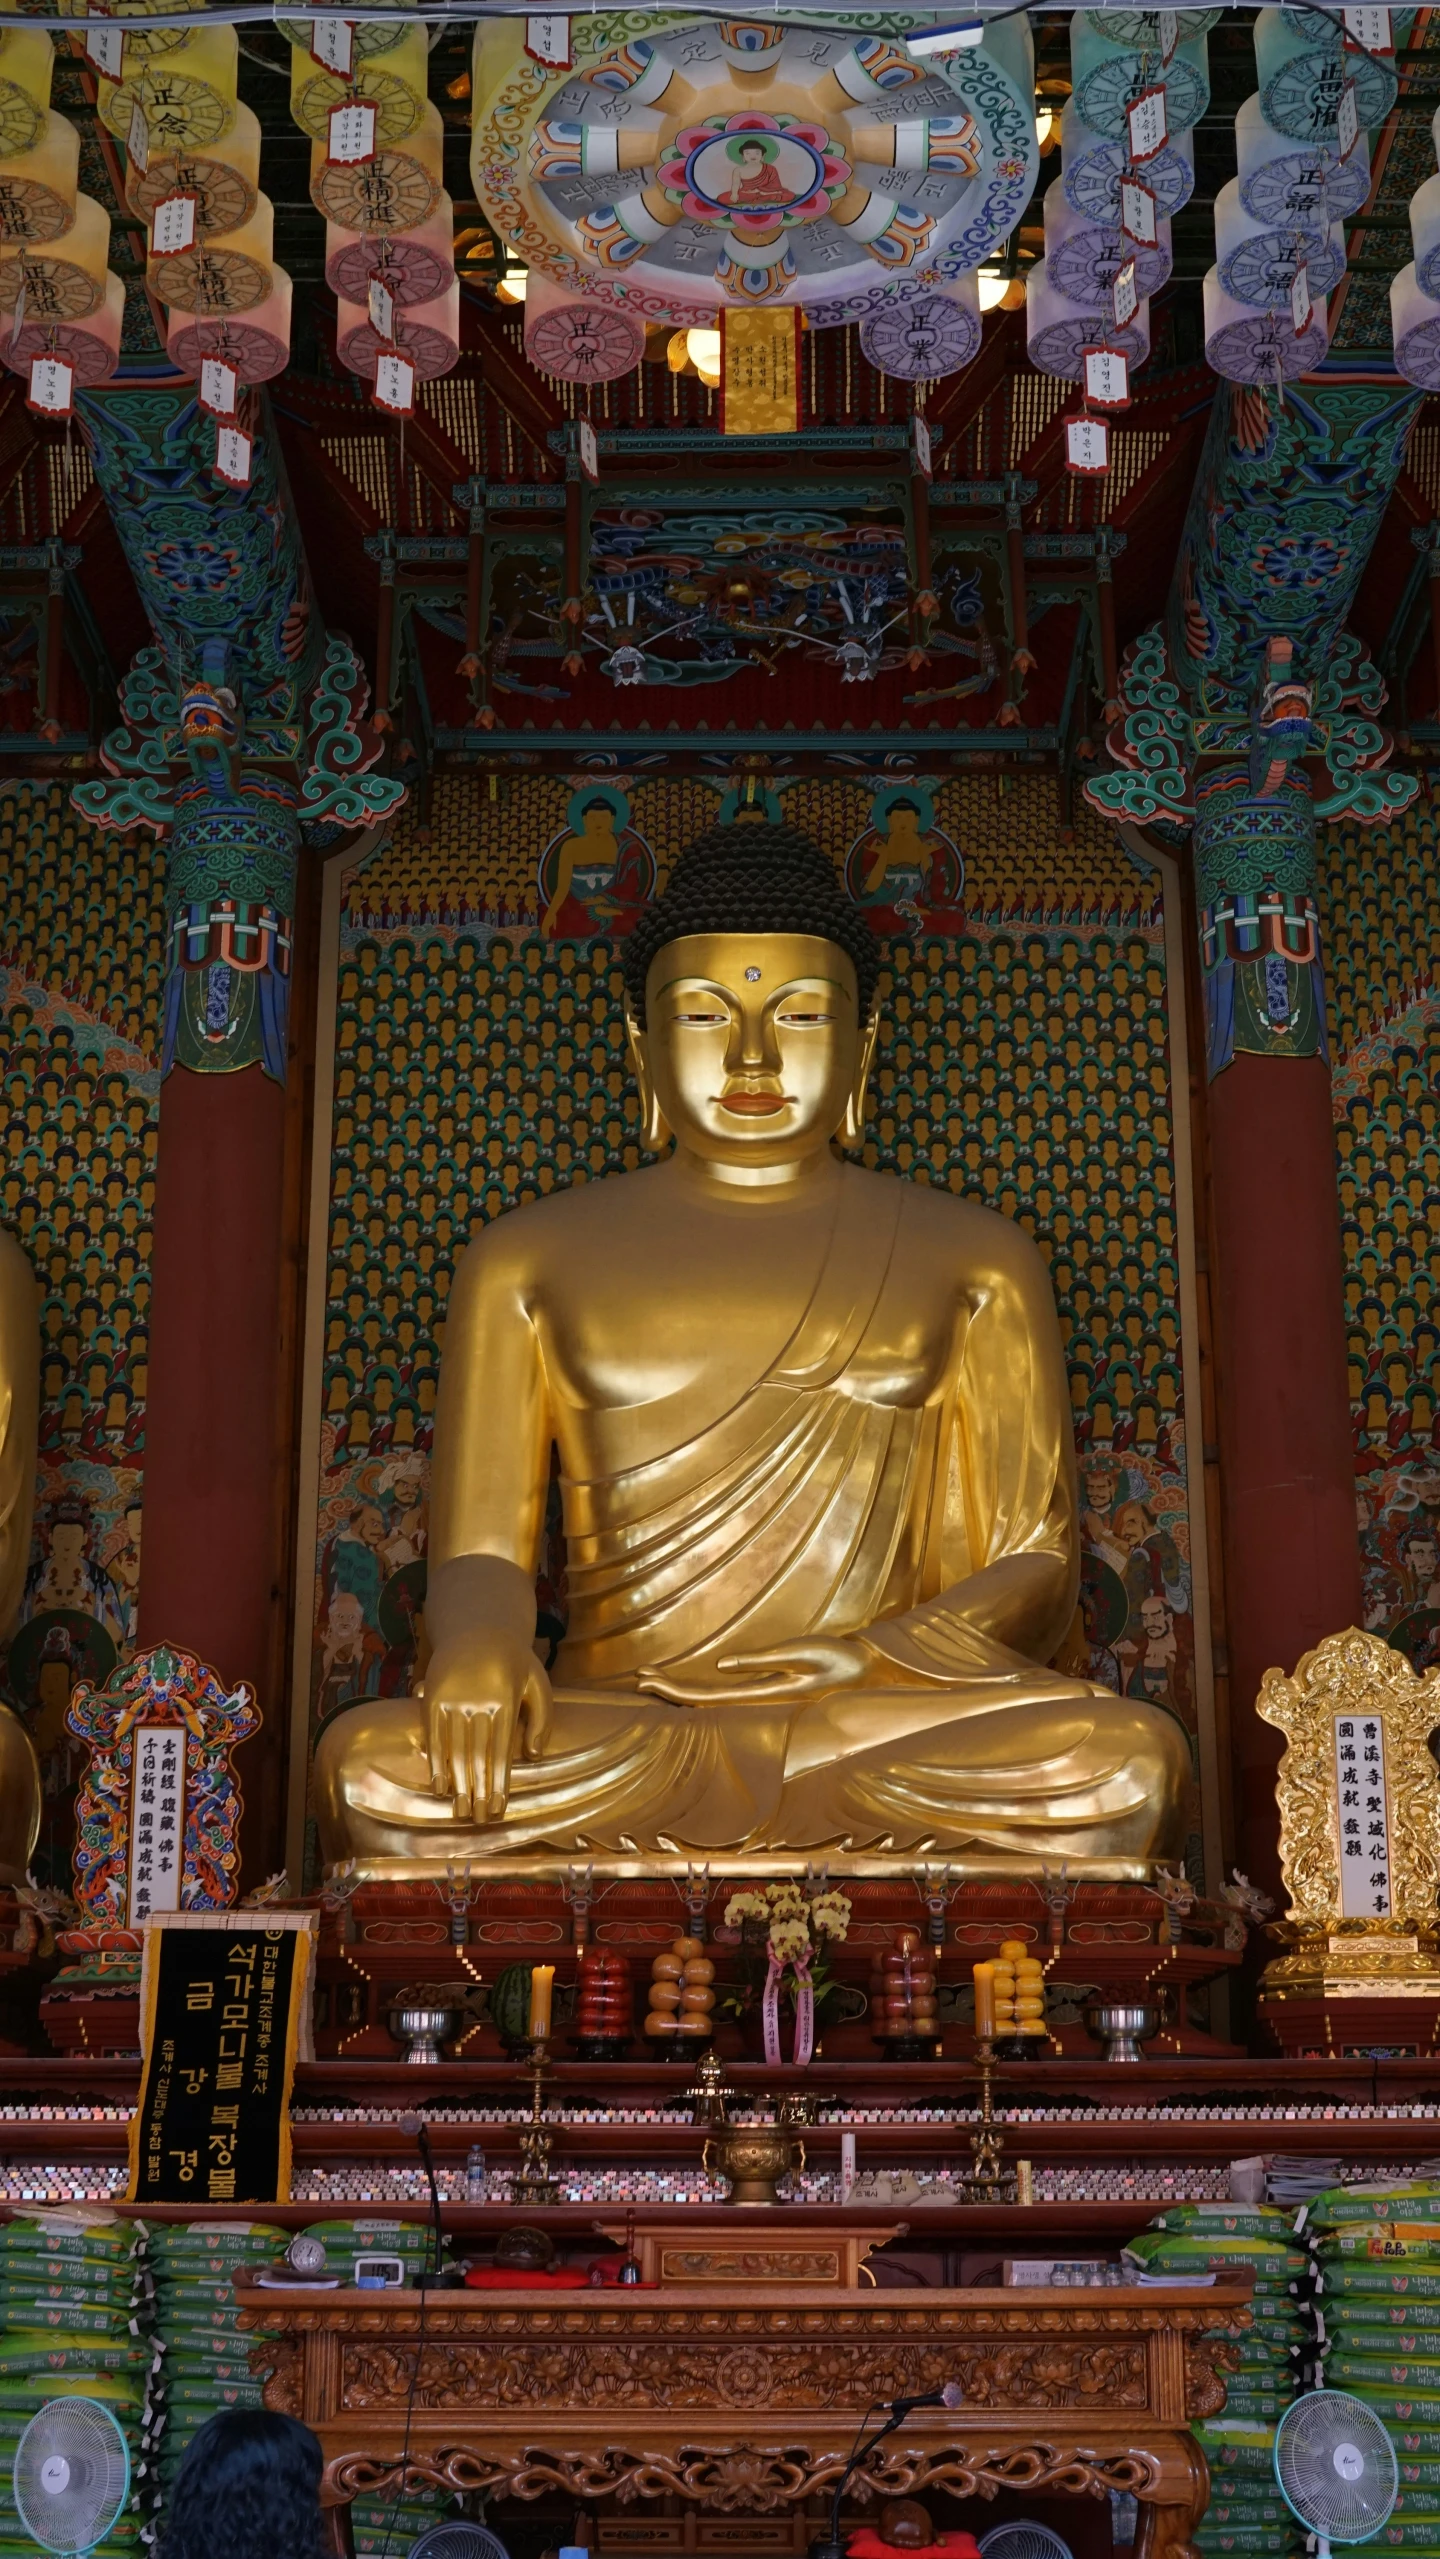 the buddha statue in the temple is in a gold color